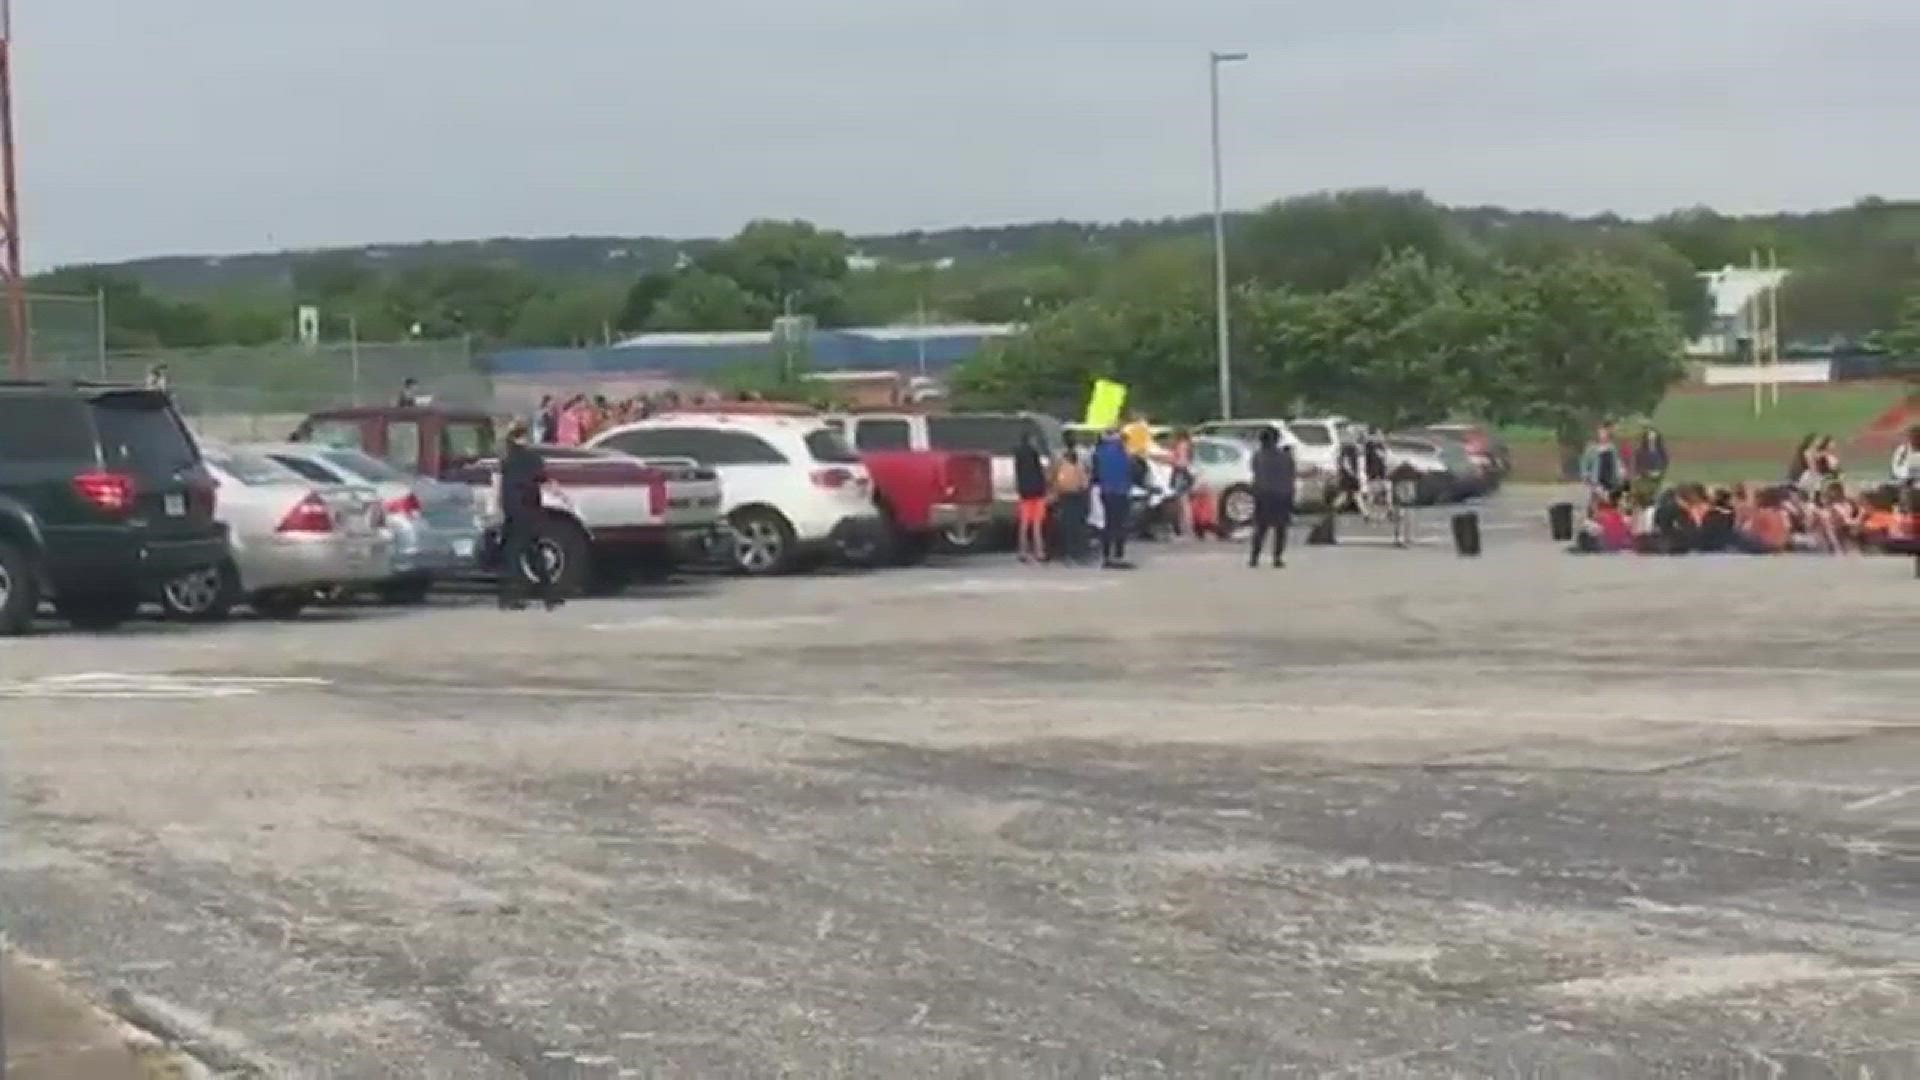 McCallum High School students walk out of class and gather in the parking lot for a rally against gun violence and for more gun restrictions.